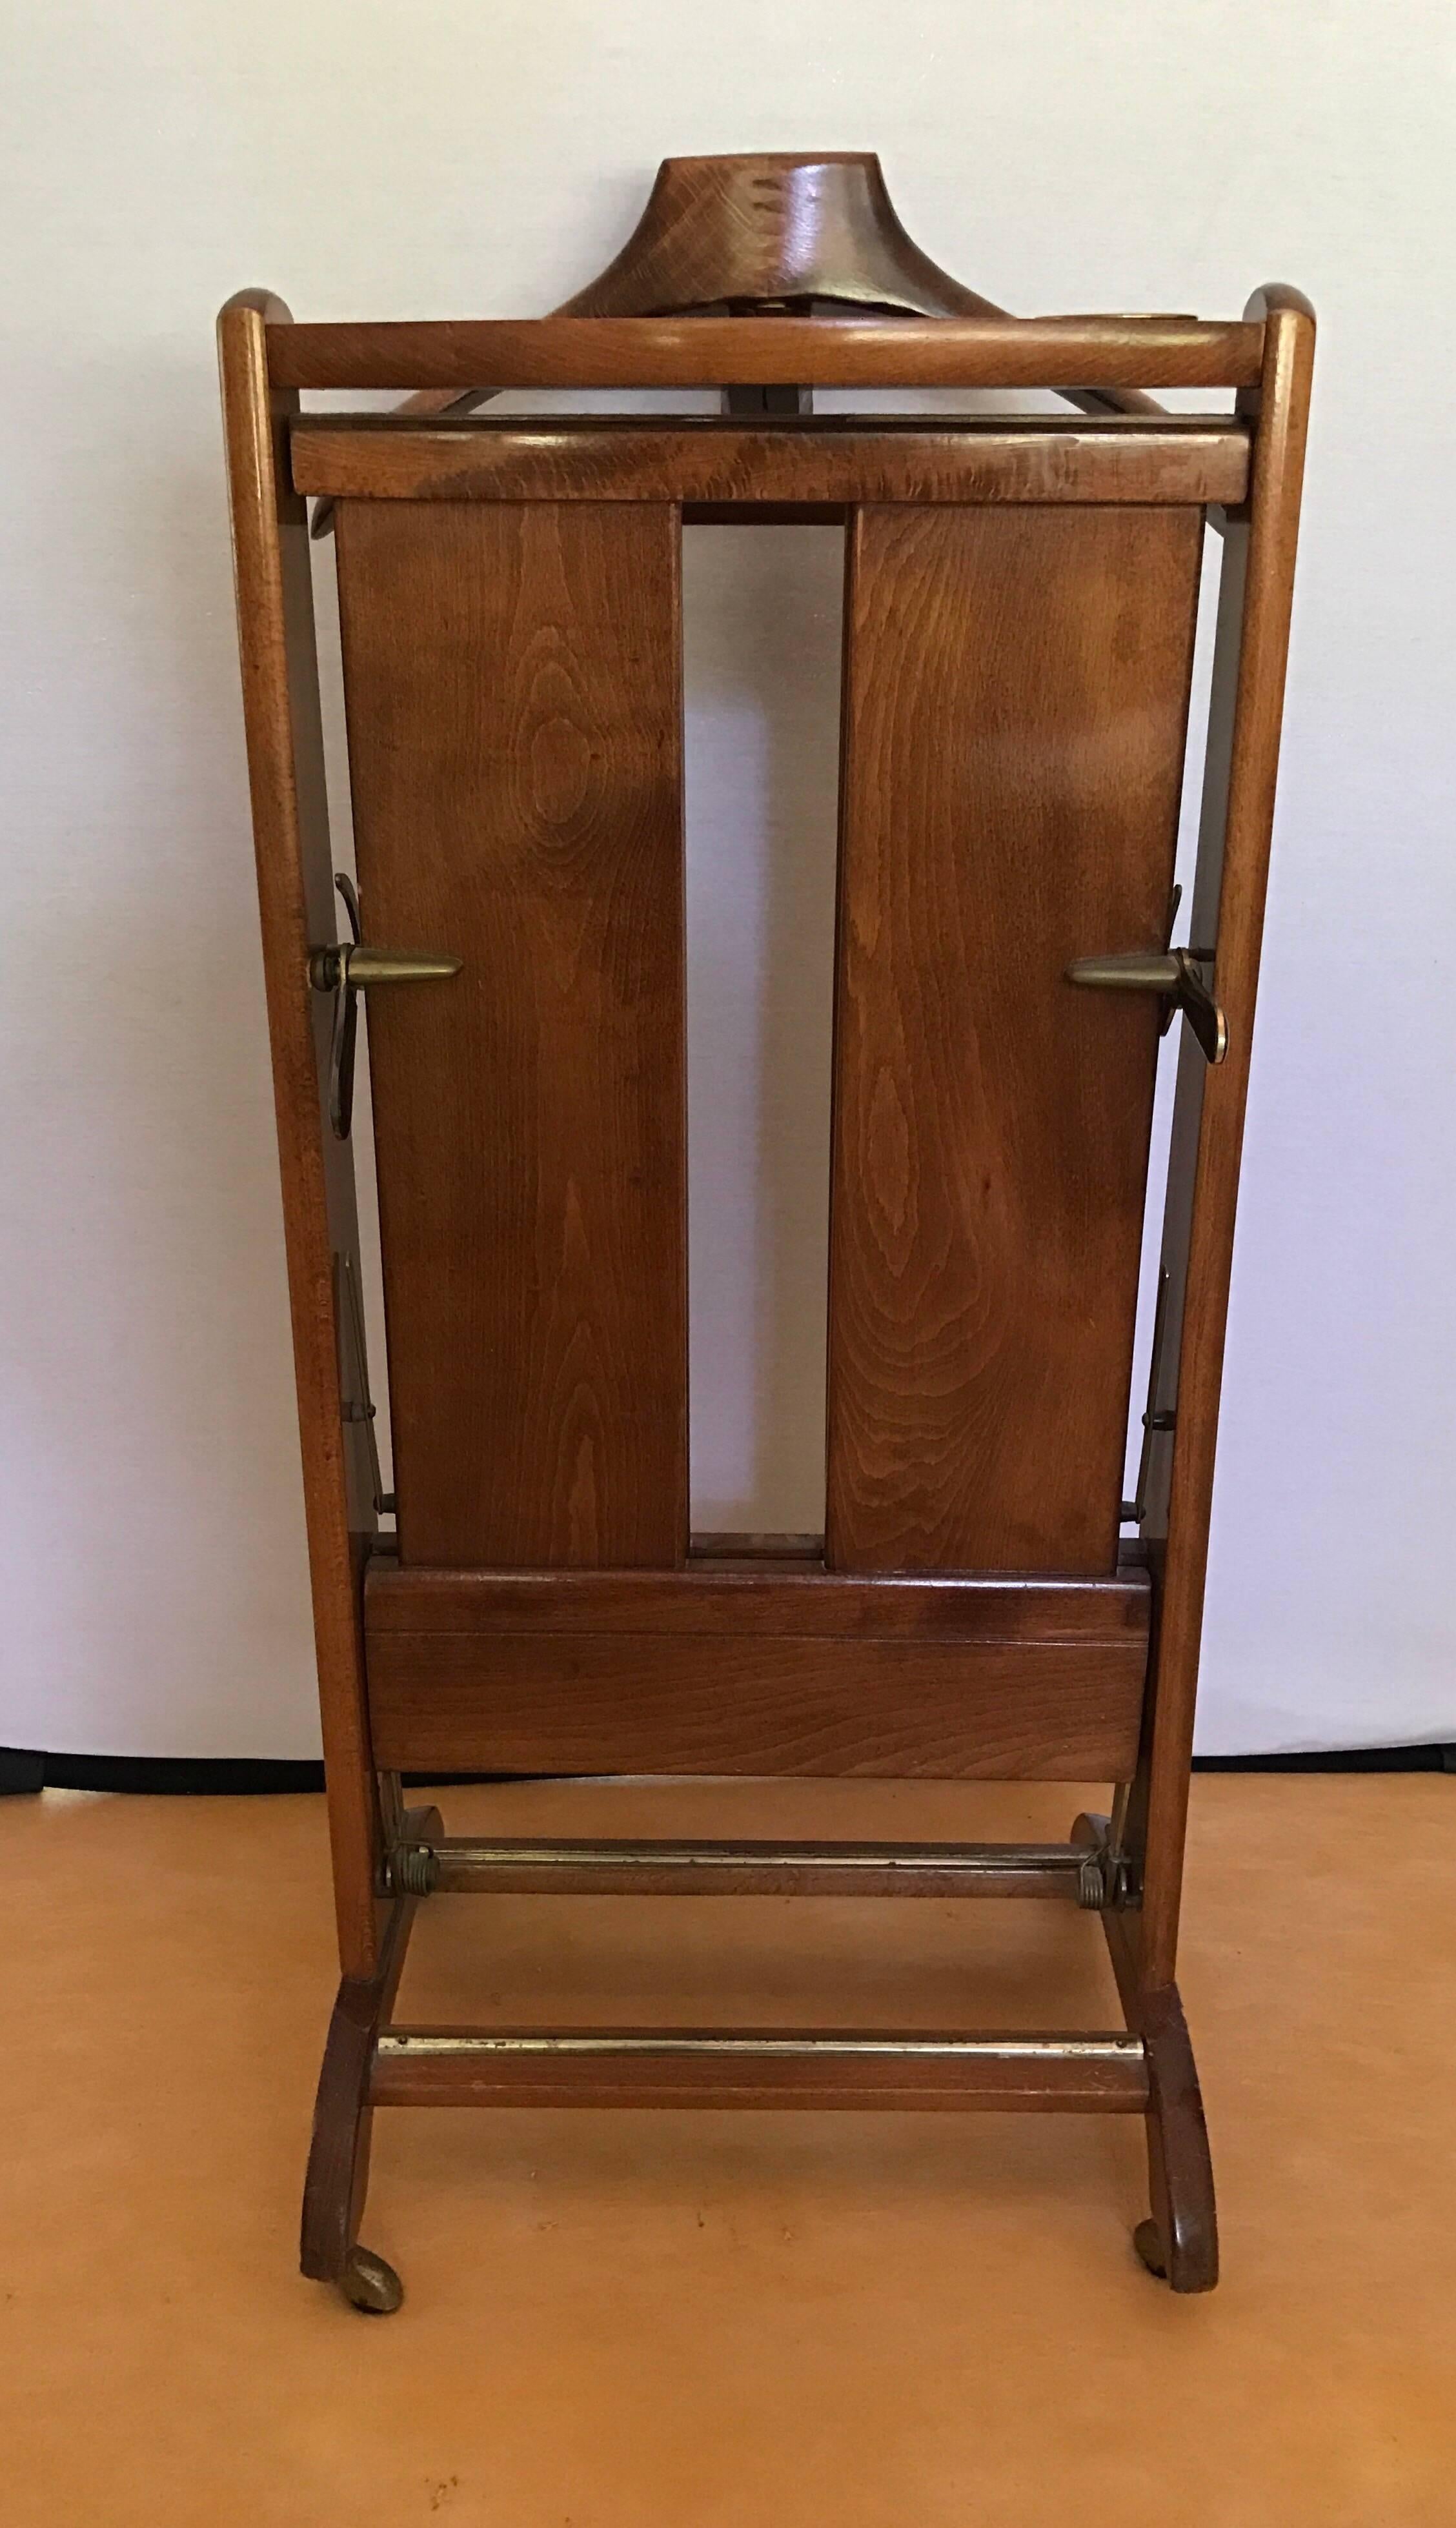 Mahogany men’s vintage valet. Great looking and functions wonderfully. For the business titan who
thought they had everything!